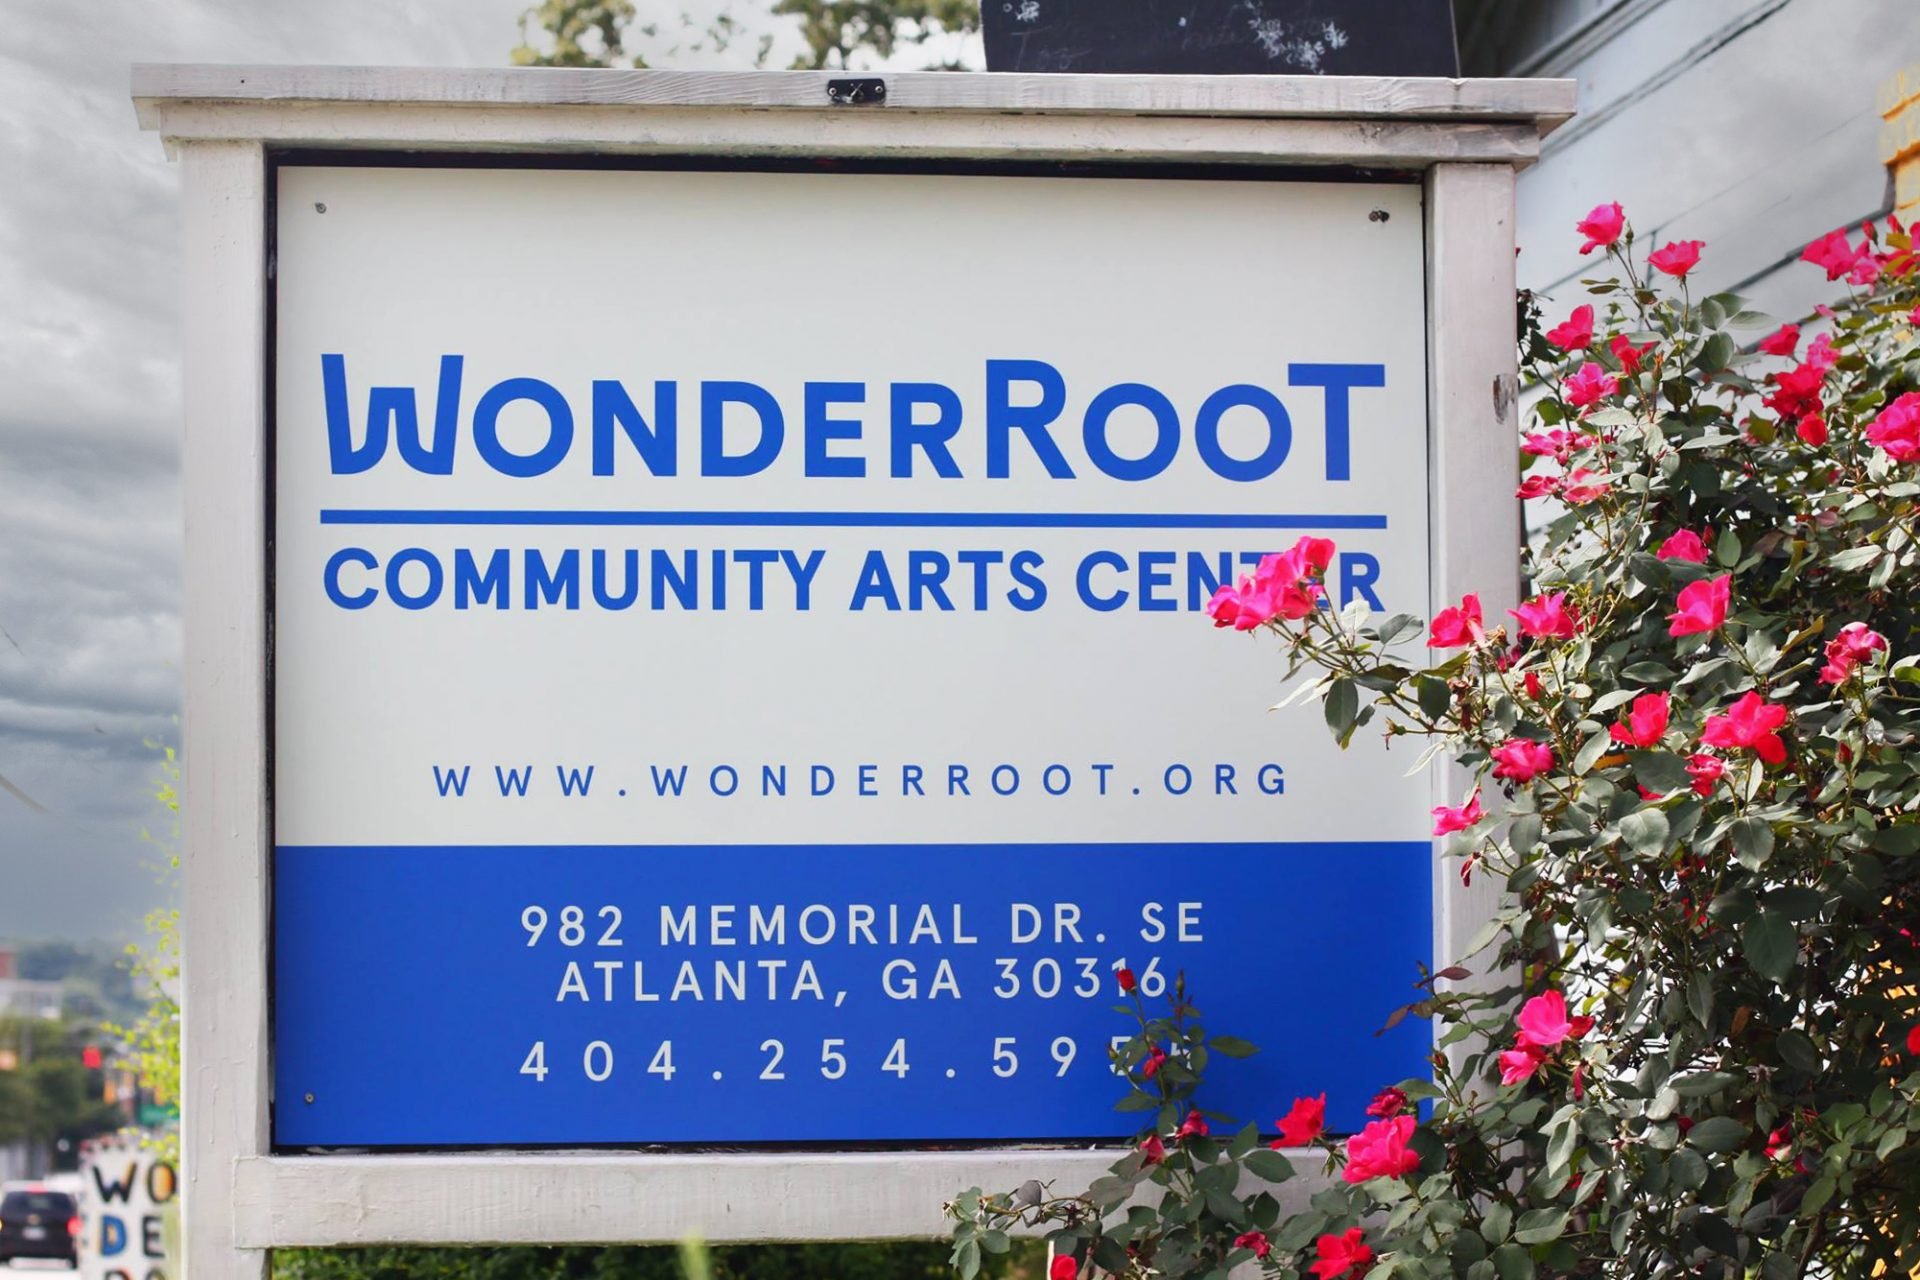 A sign for the WonderRoot Community Arts Center with a white background and blue text that gives the name, website, and address of the center. The sign is framed by pink flowers and green leaves. The sky behind the sign is cloudy.